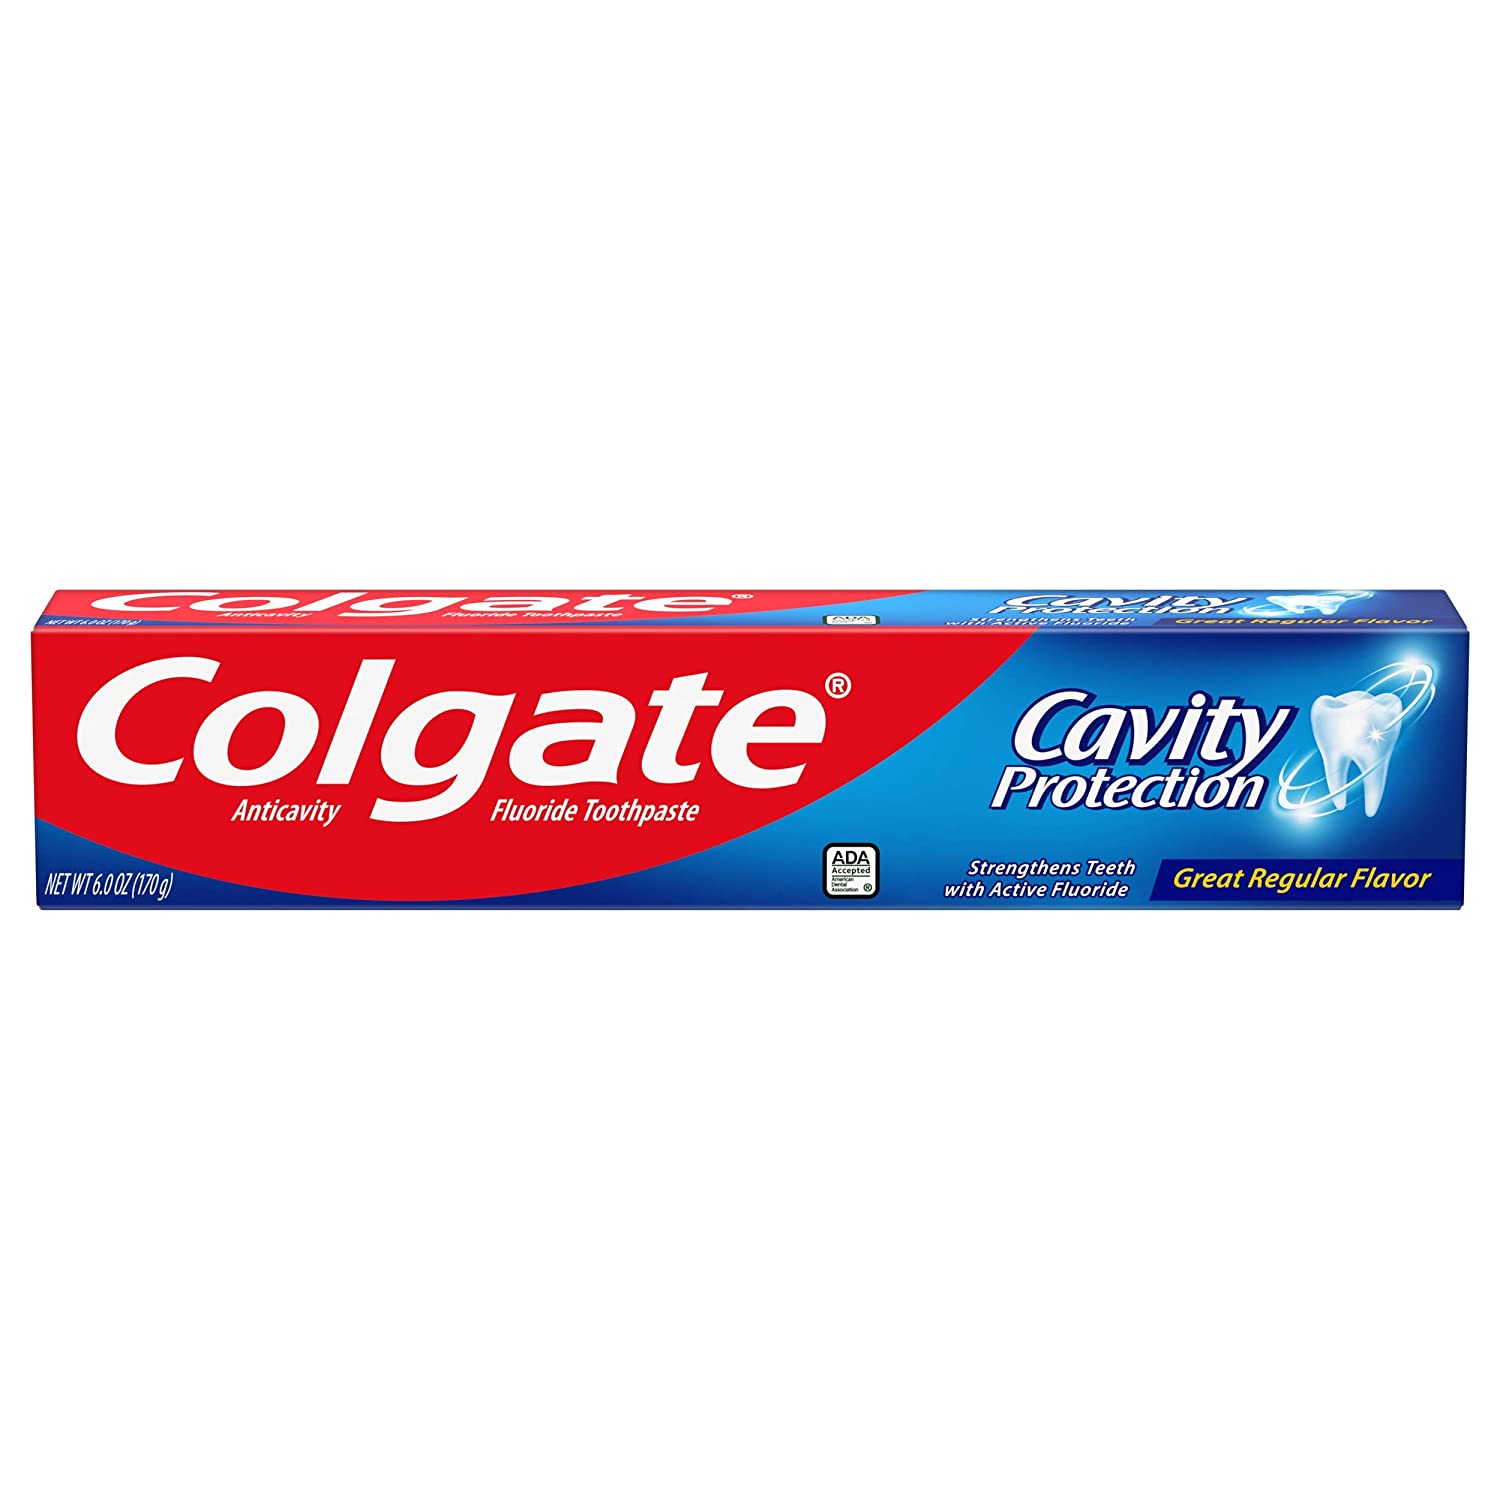 6-Pack 6-Oz Colgate Cavity Protection Toothpaste w/Fluoride $6.14 w/ S&S + Free Shipping w/ Prime or on orders over $25